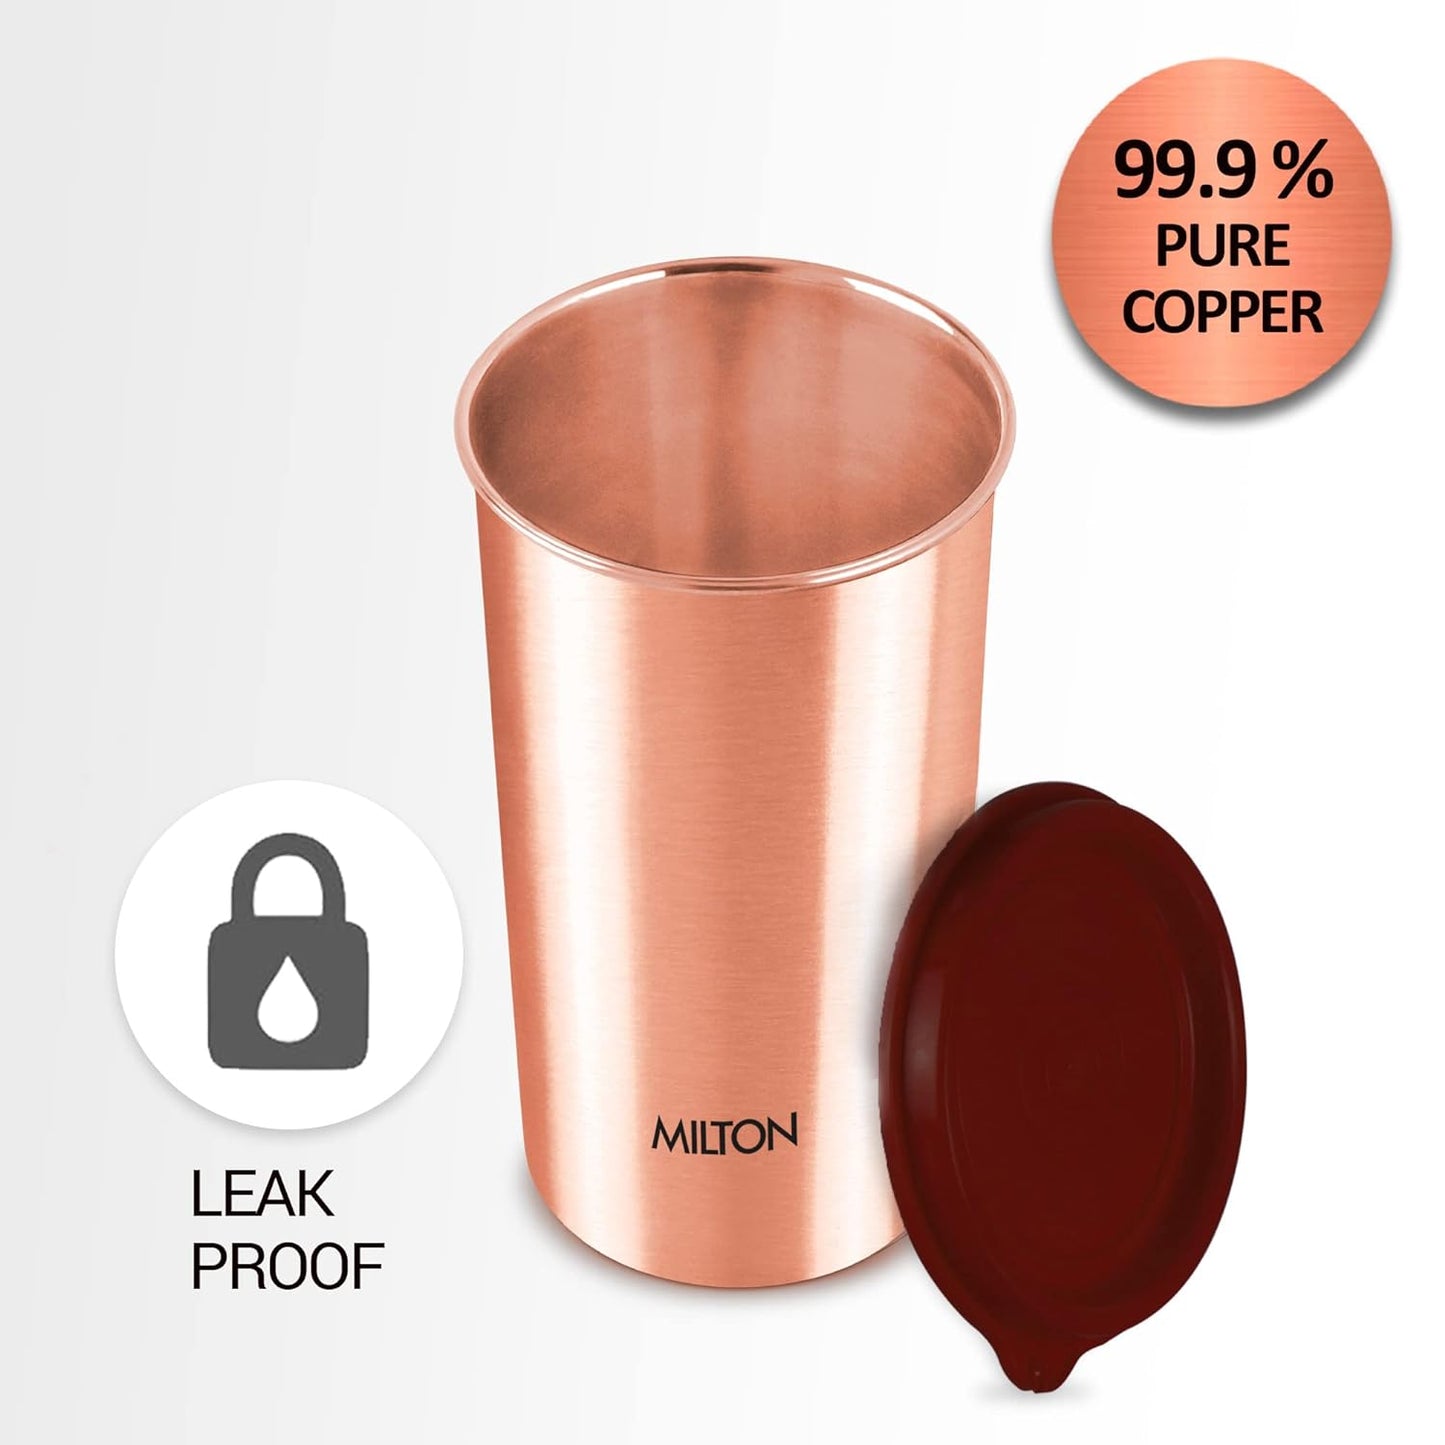 MILTON Copper Drinking Water Tumbler with Lid - 480 ml Capacity